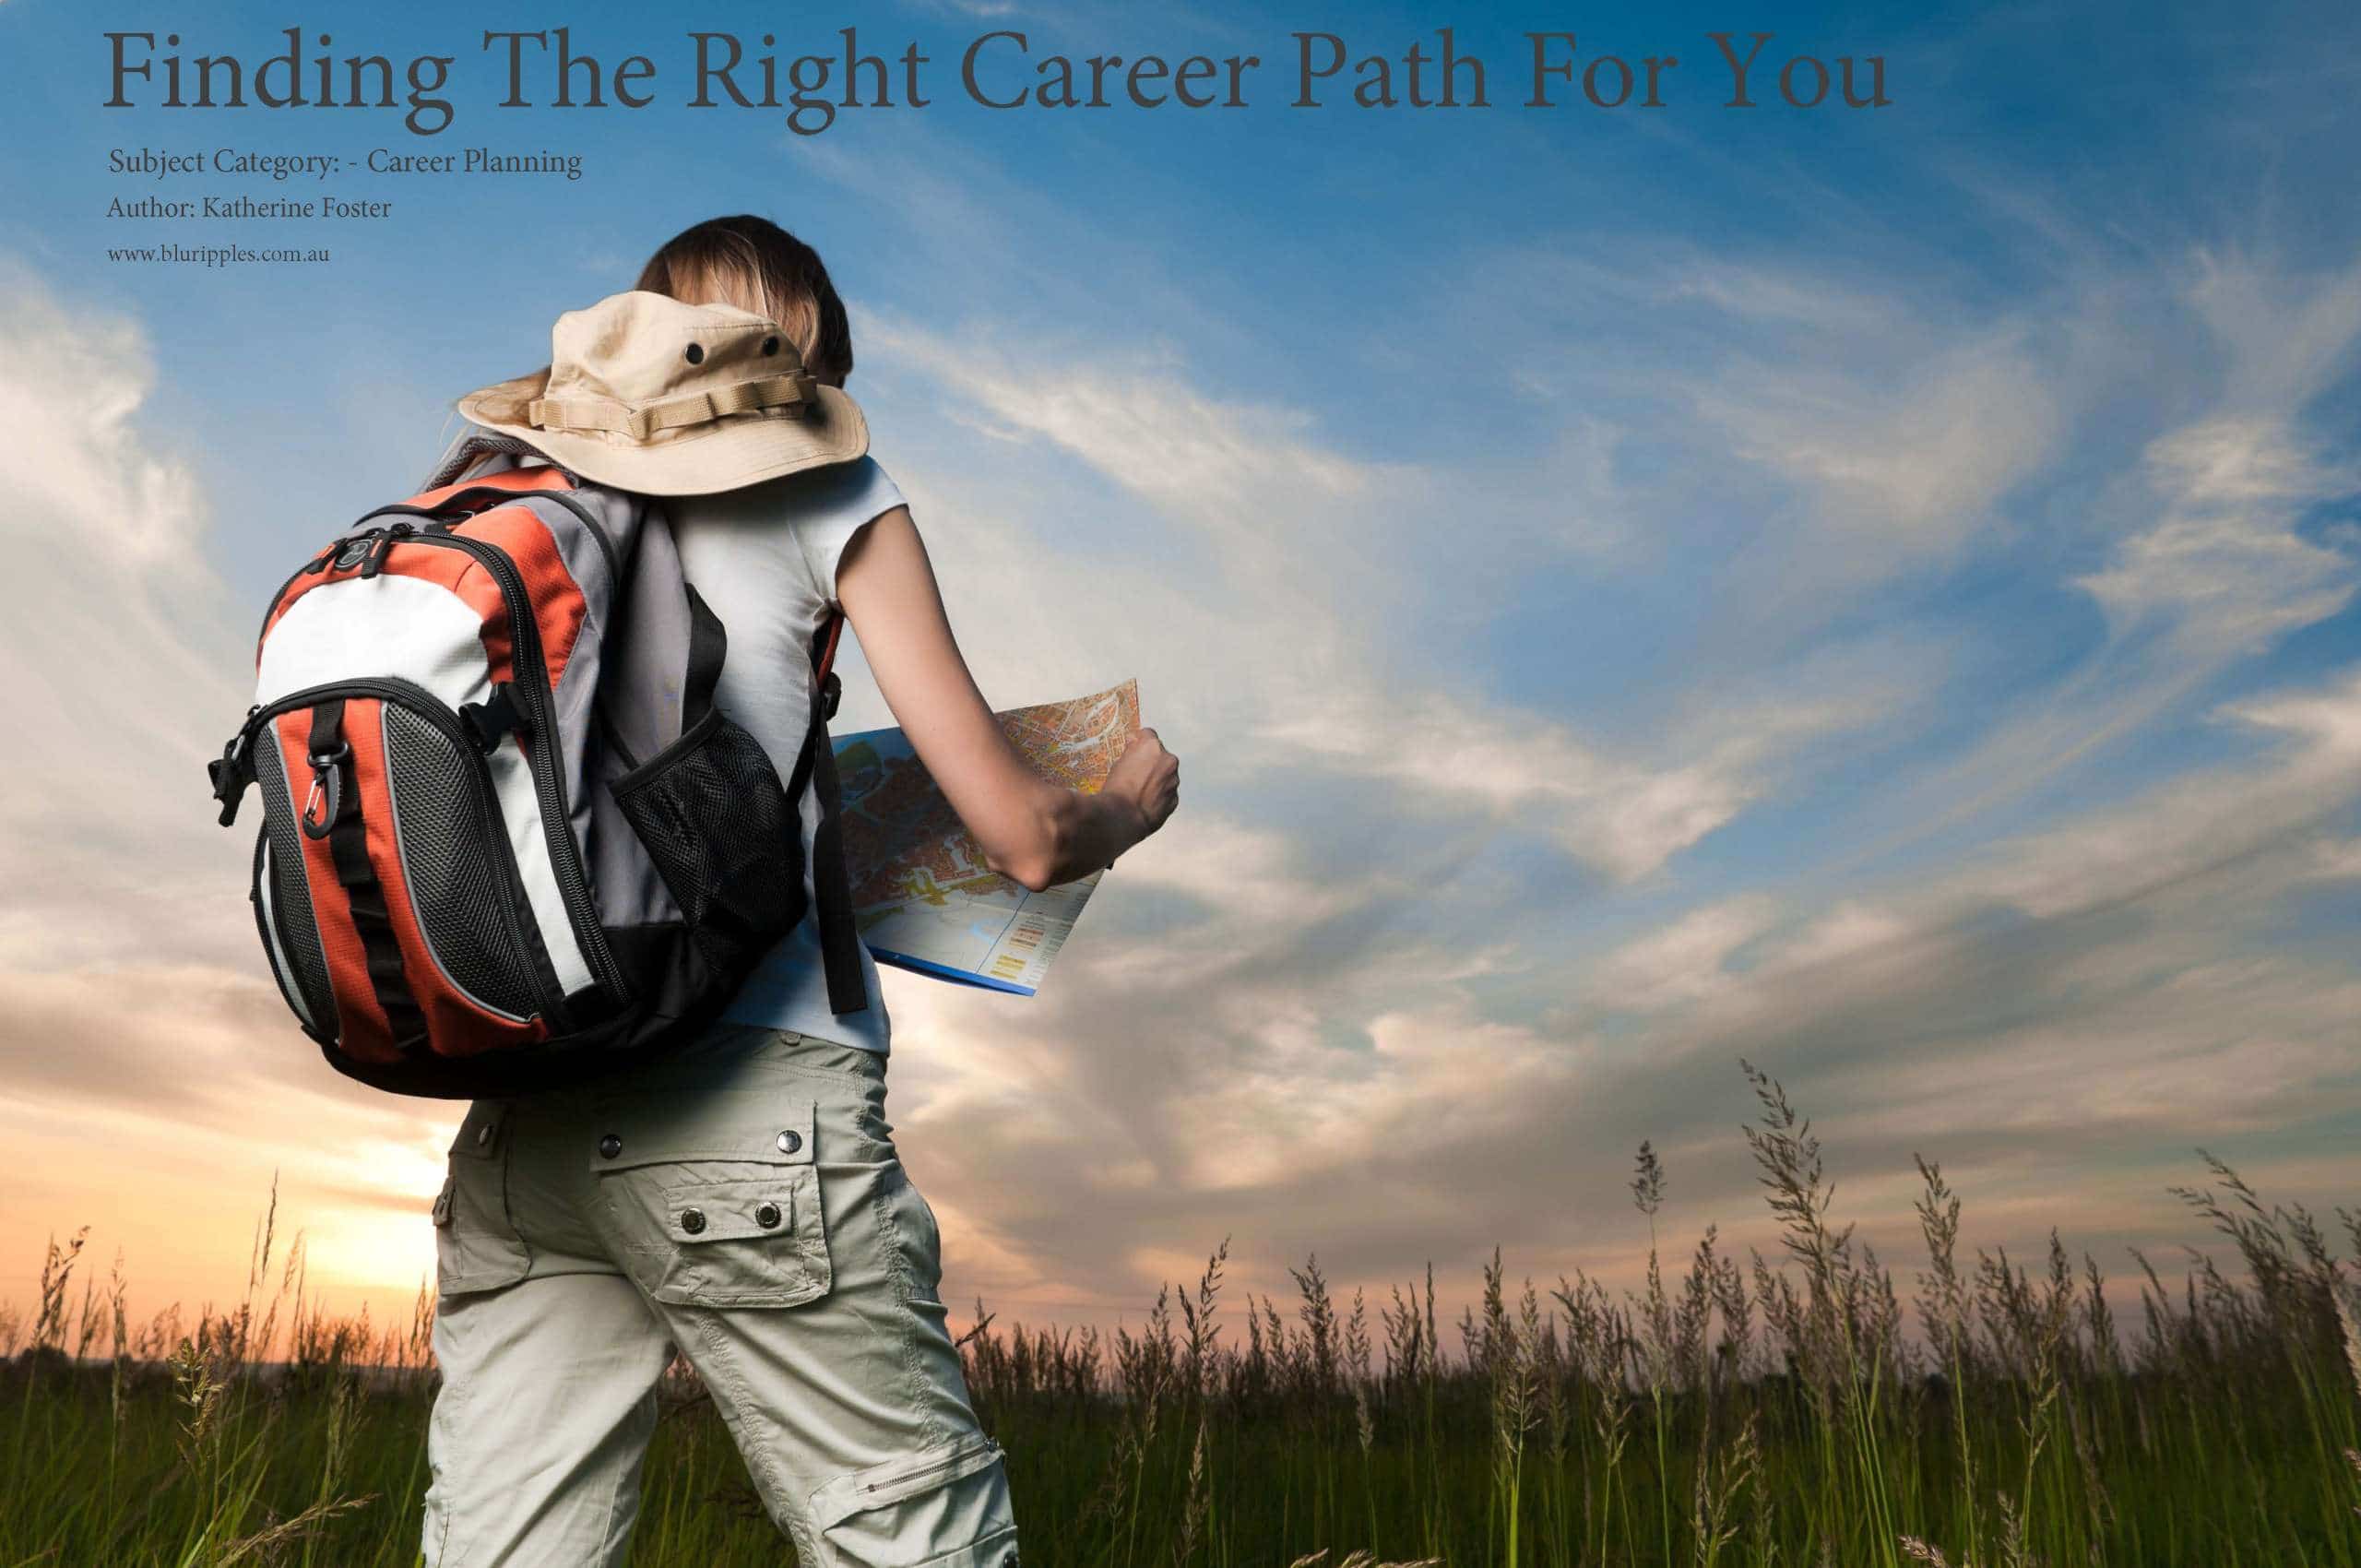 Career Planning; Author: Katherine Foster